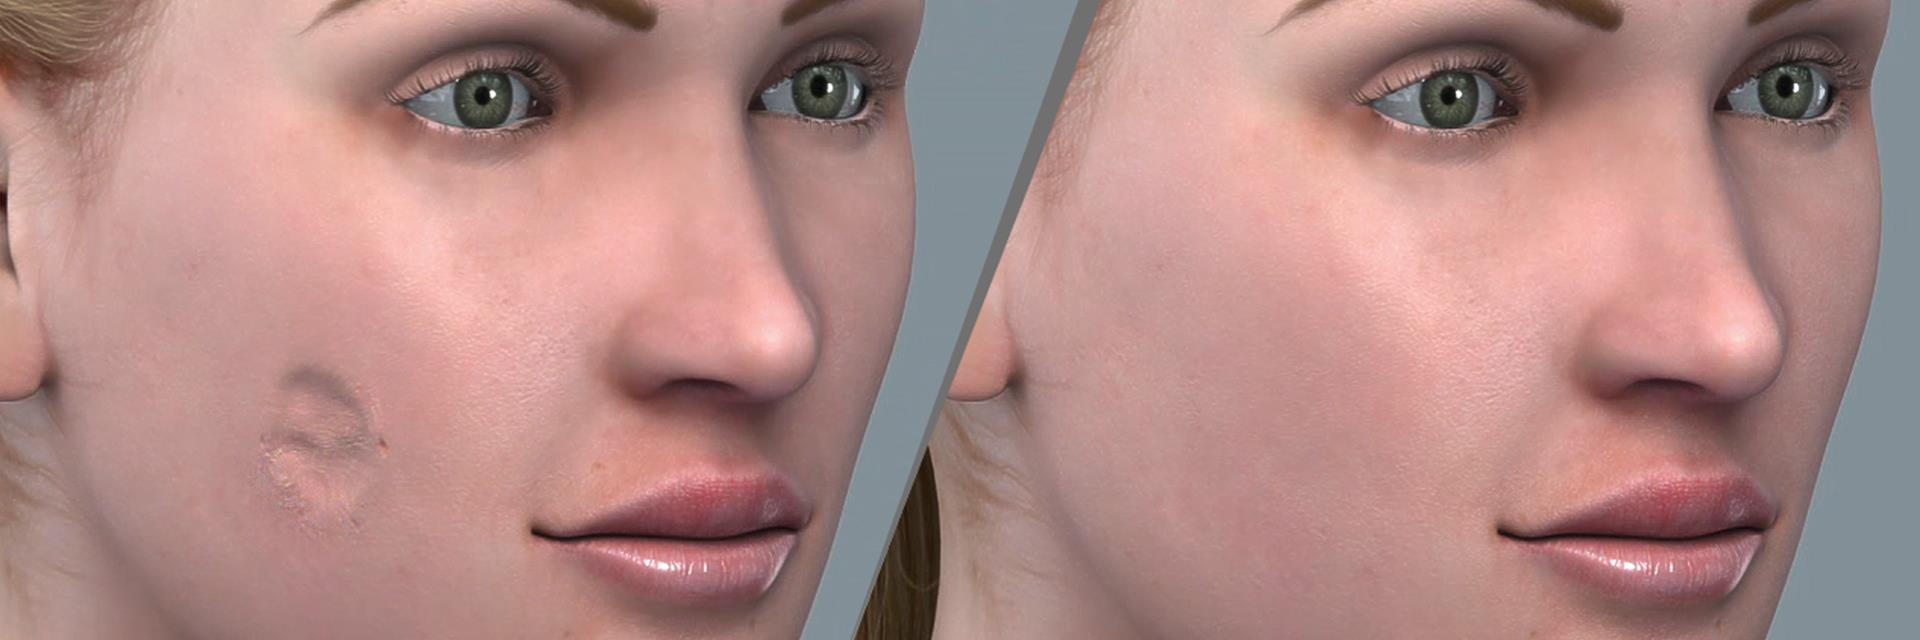 Restoration of Facial Skin Defects